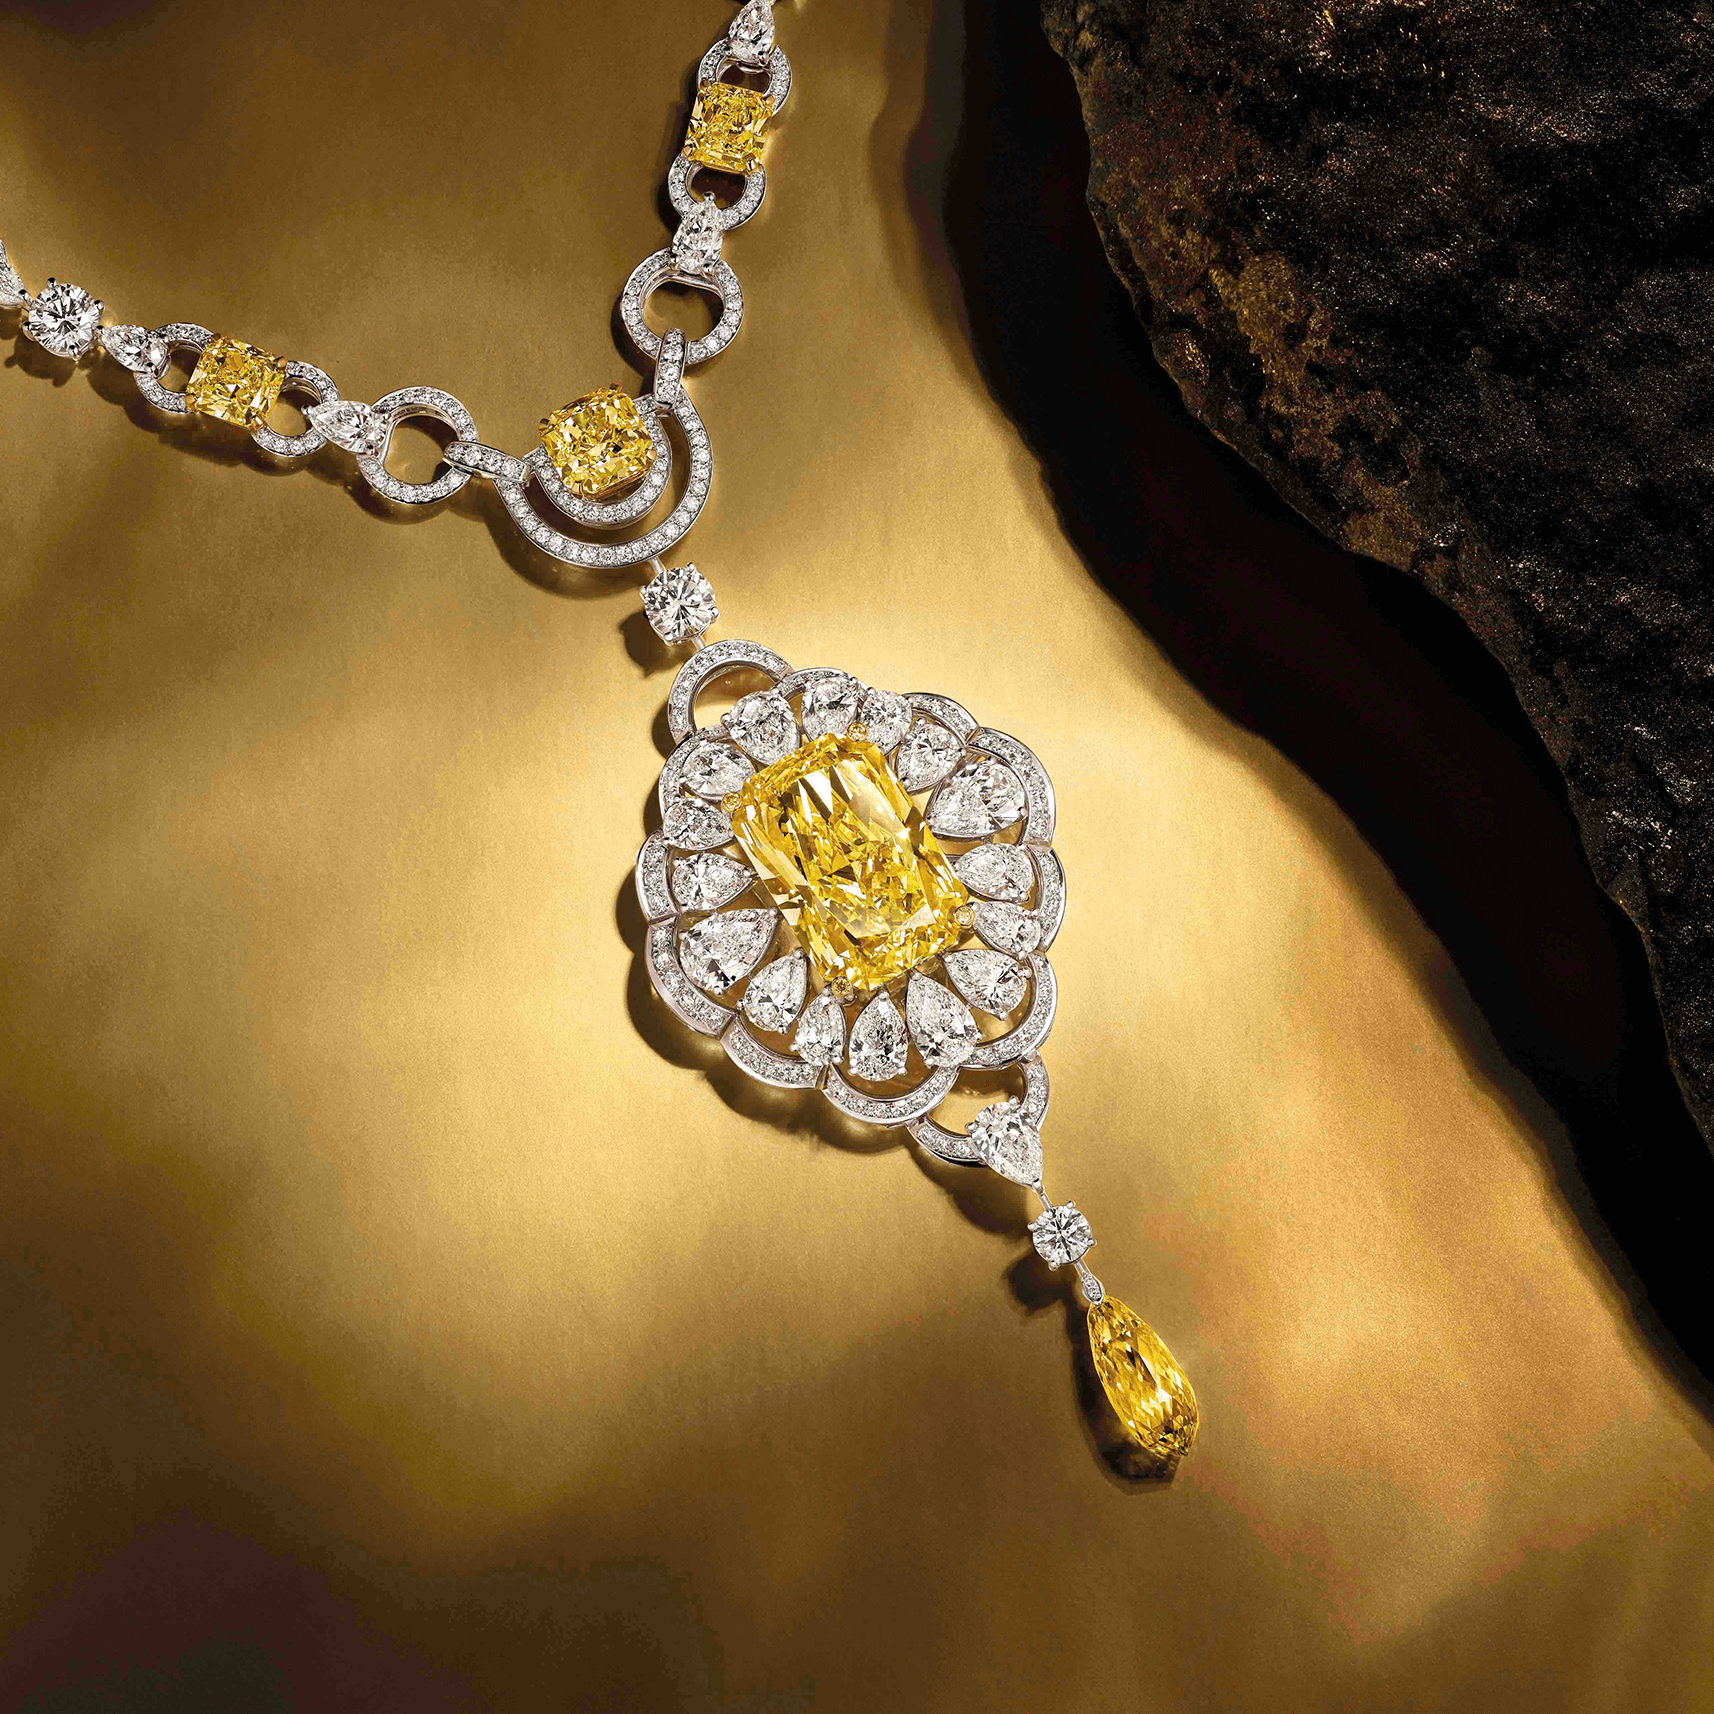 A Graff Yellow and White Diamond High Jewellery Necklace square